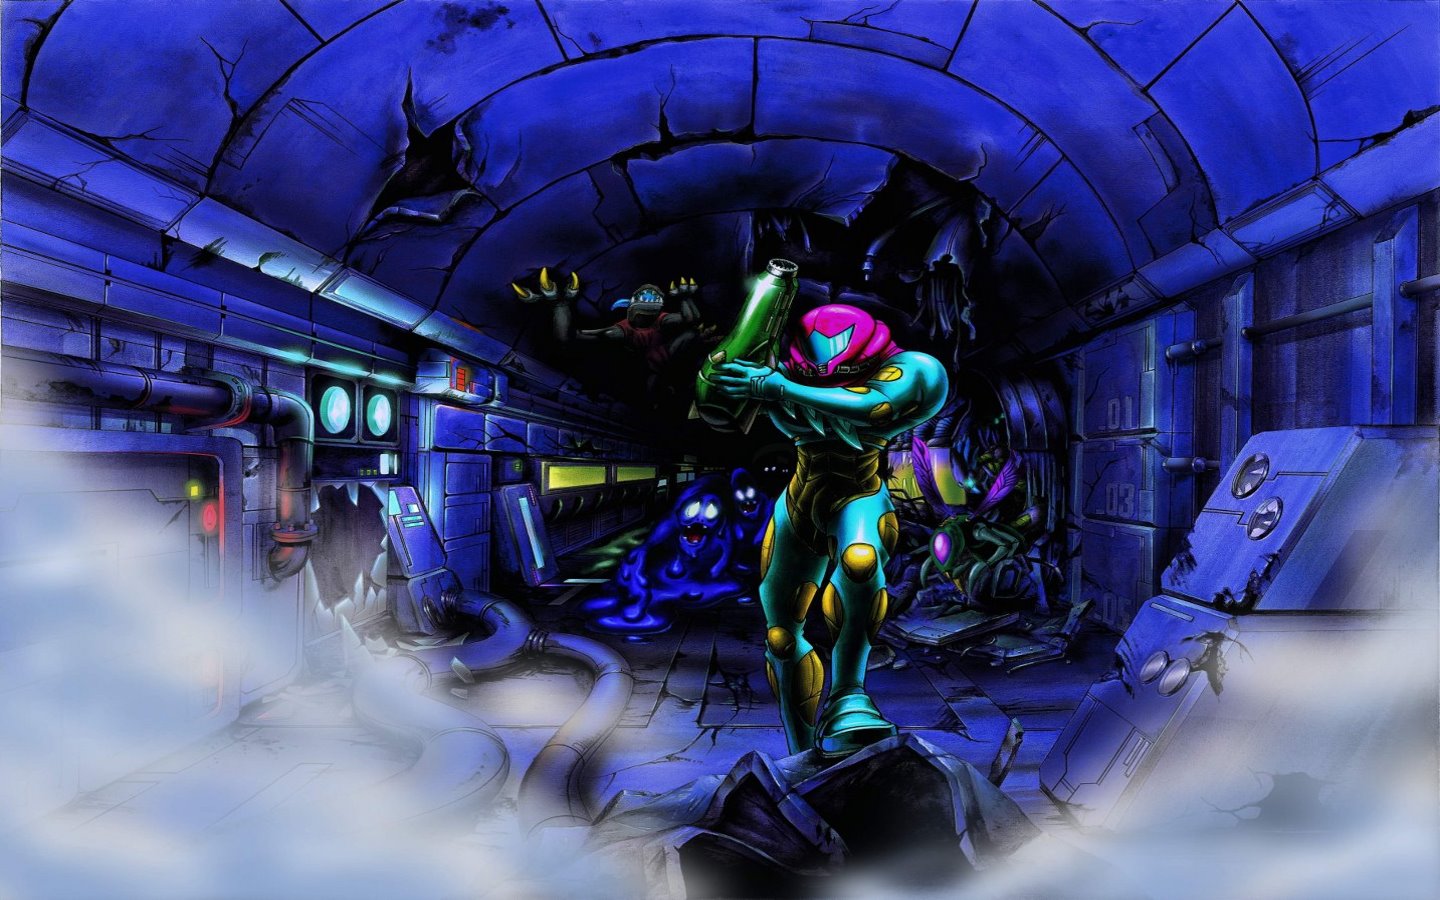 Metroid Wallpapers And Stock Photos - Metroid Fusion Official Art , HD Wallpaper & Backgrounds